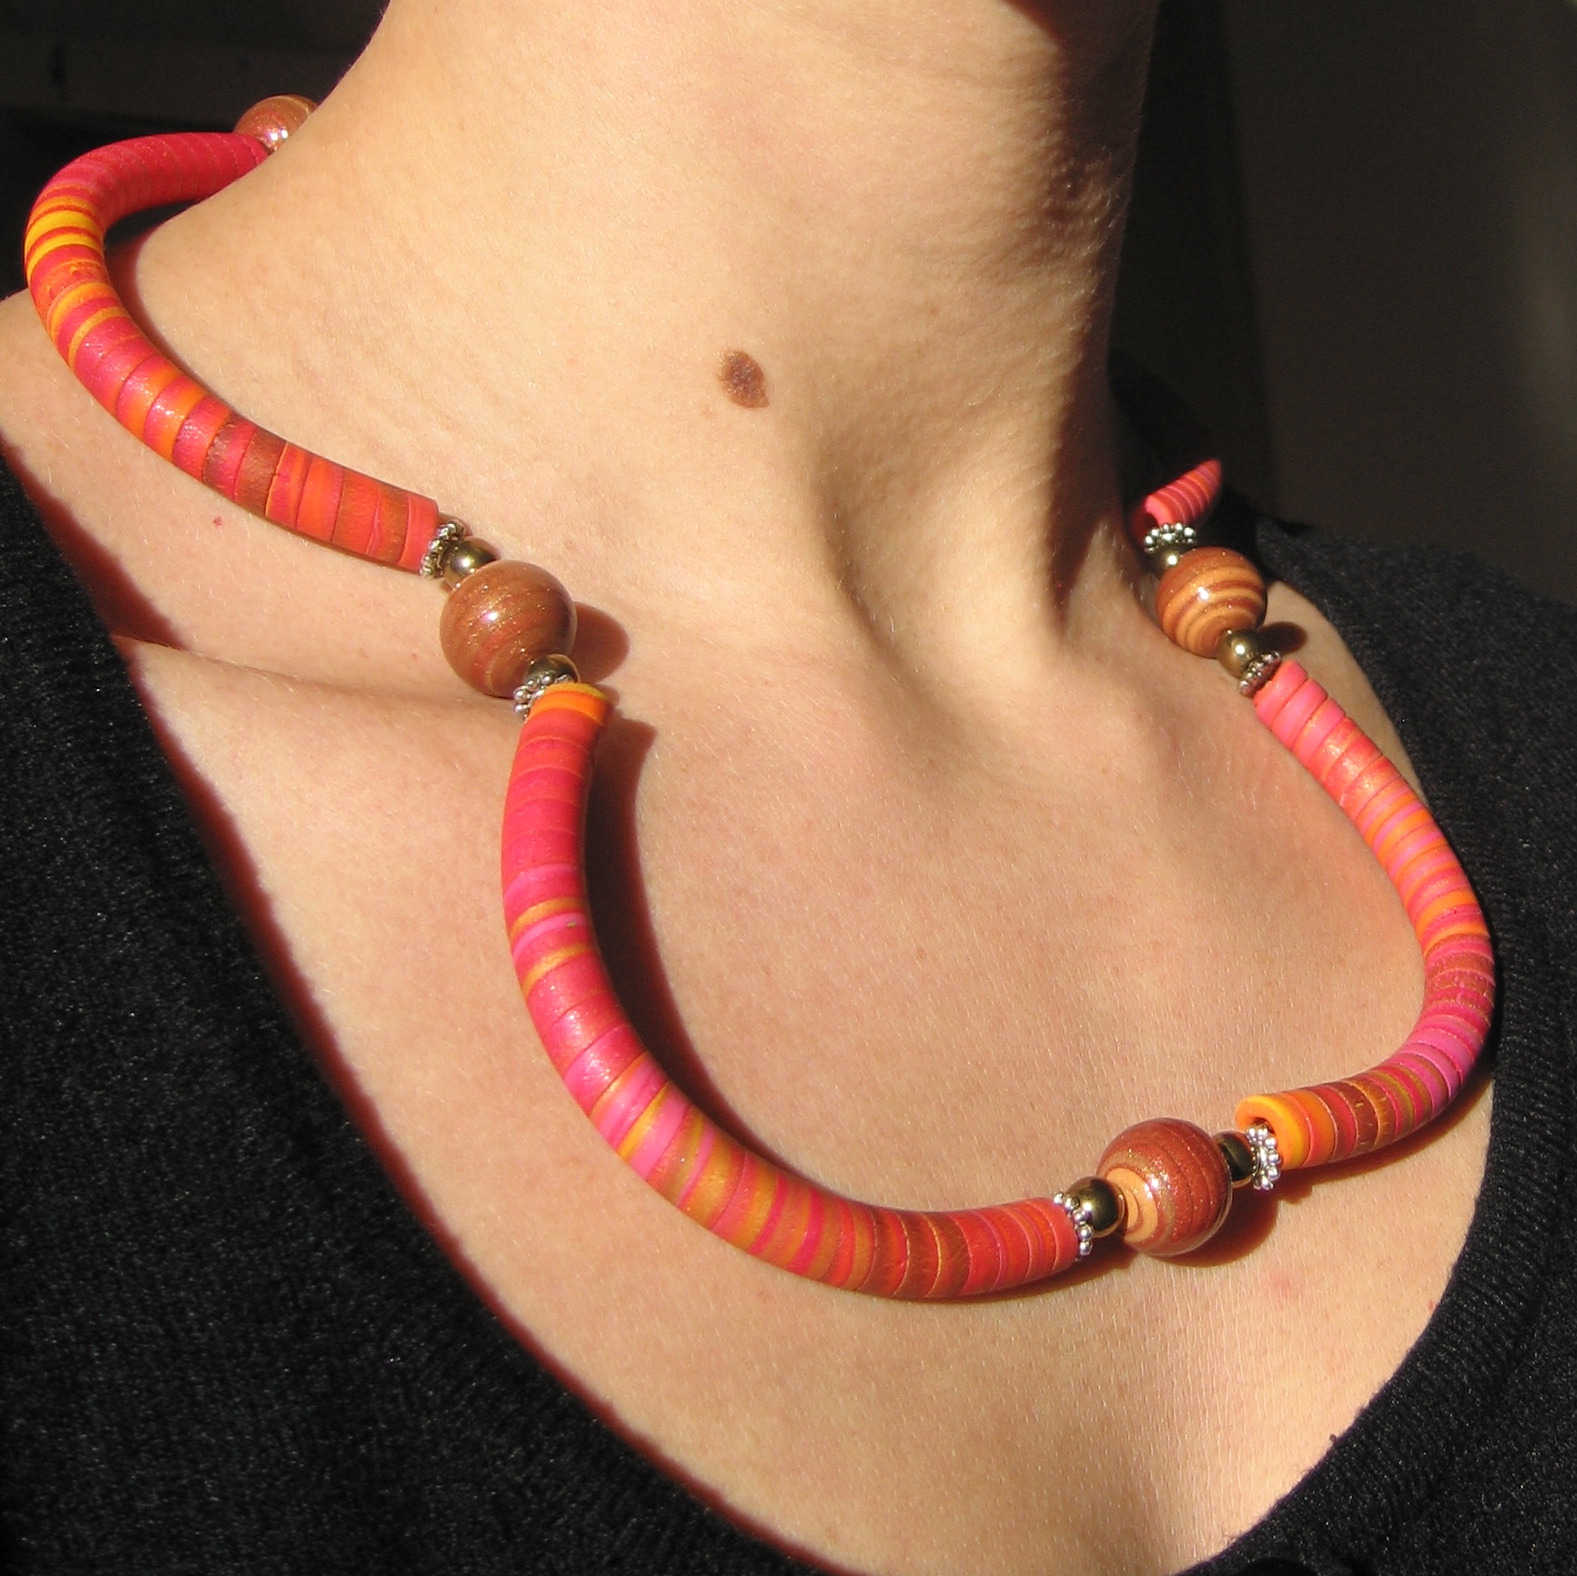 a necklace made with wooden beads in different colors